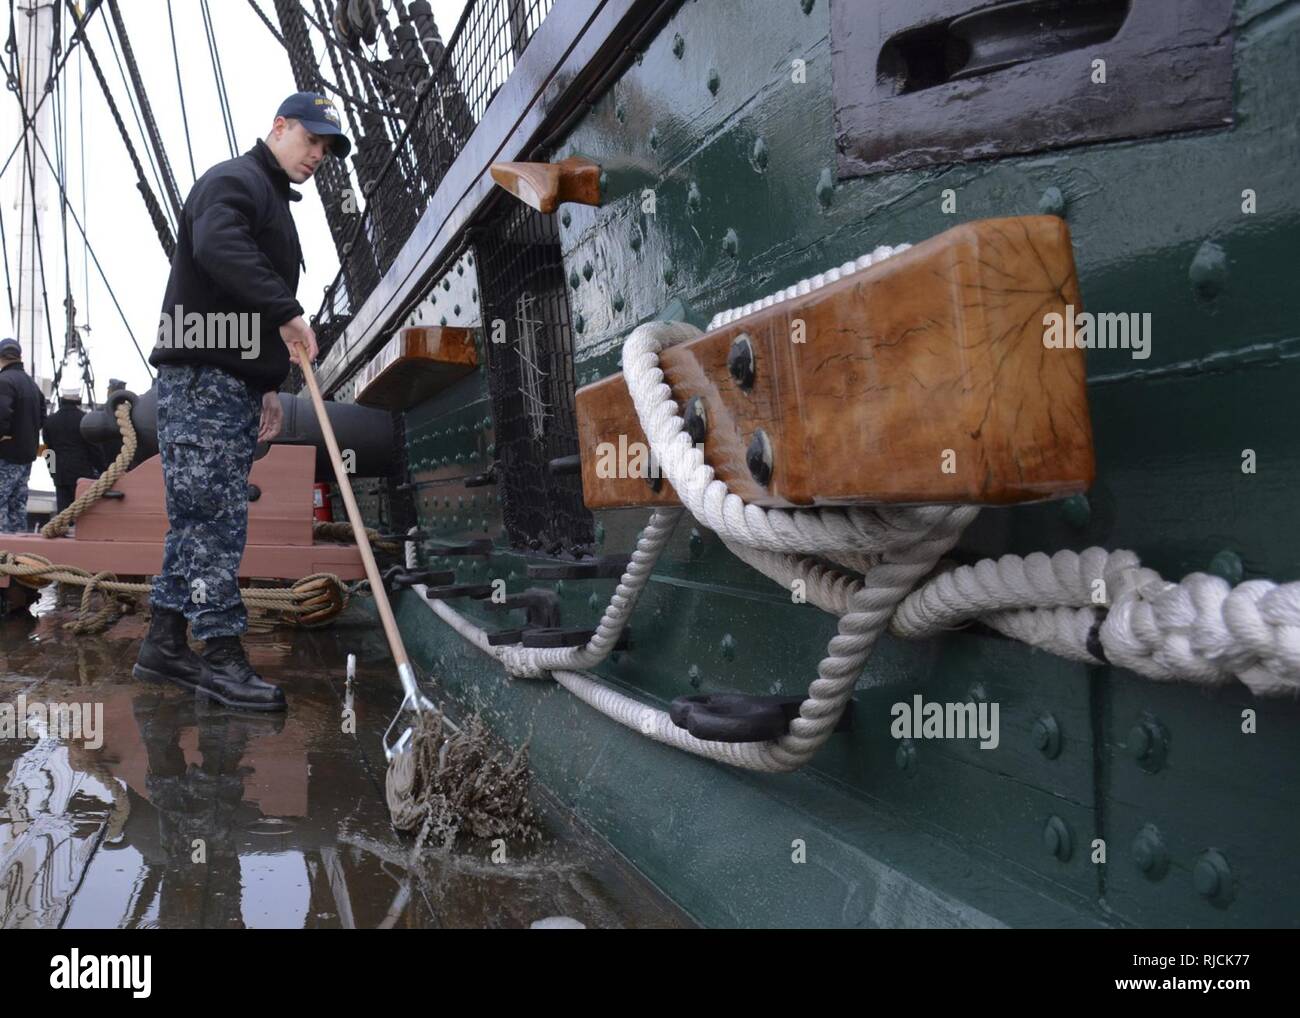 BOSTON (Jan. 11, 2018) Gas Turbine Systems Technician Mechanical 3rd Class Kyle Brennan assists in cleanup of the USS Constitution following heavy snow storms in the area. The crew maintains cleanliness daily of all spaces aboard the ship. Stock Photo